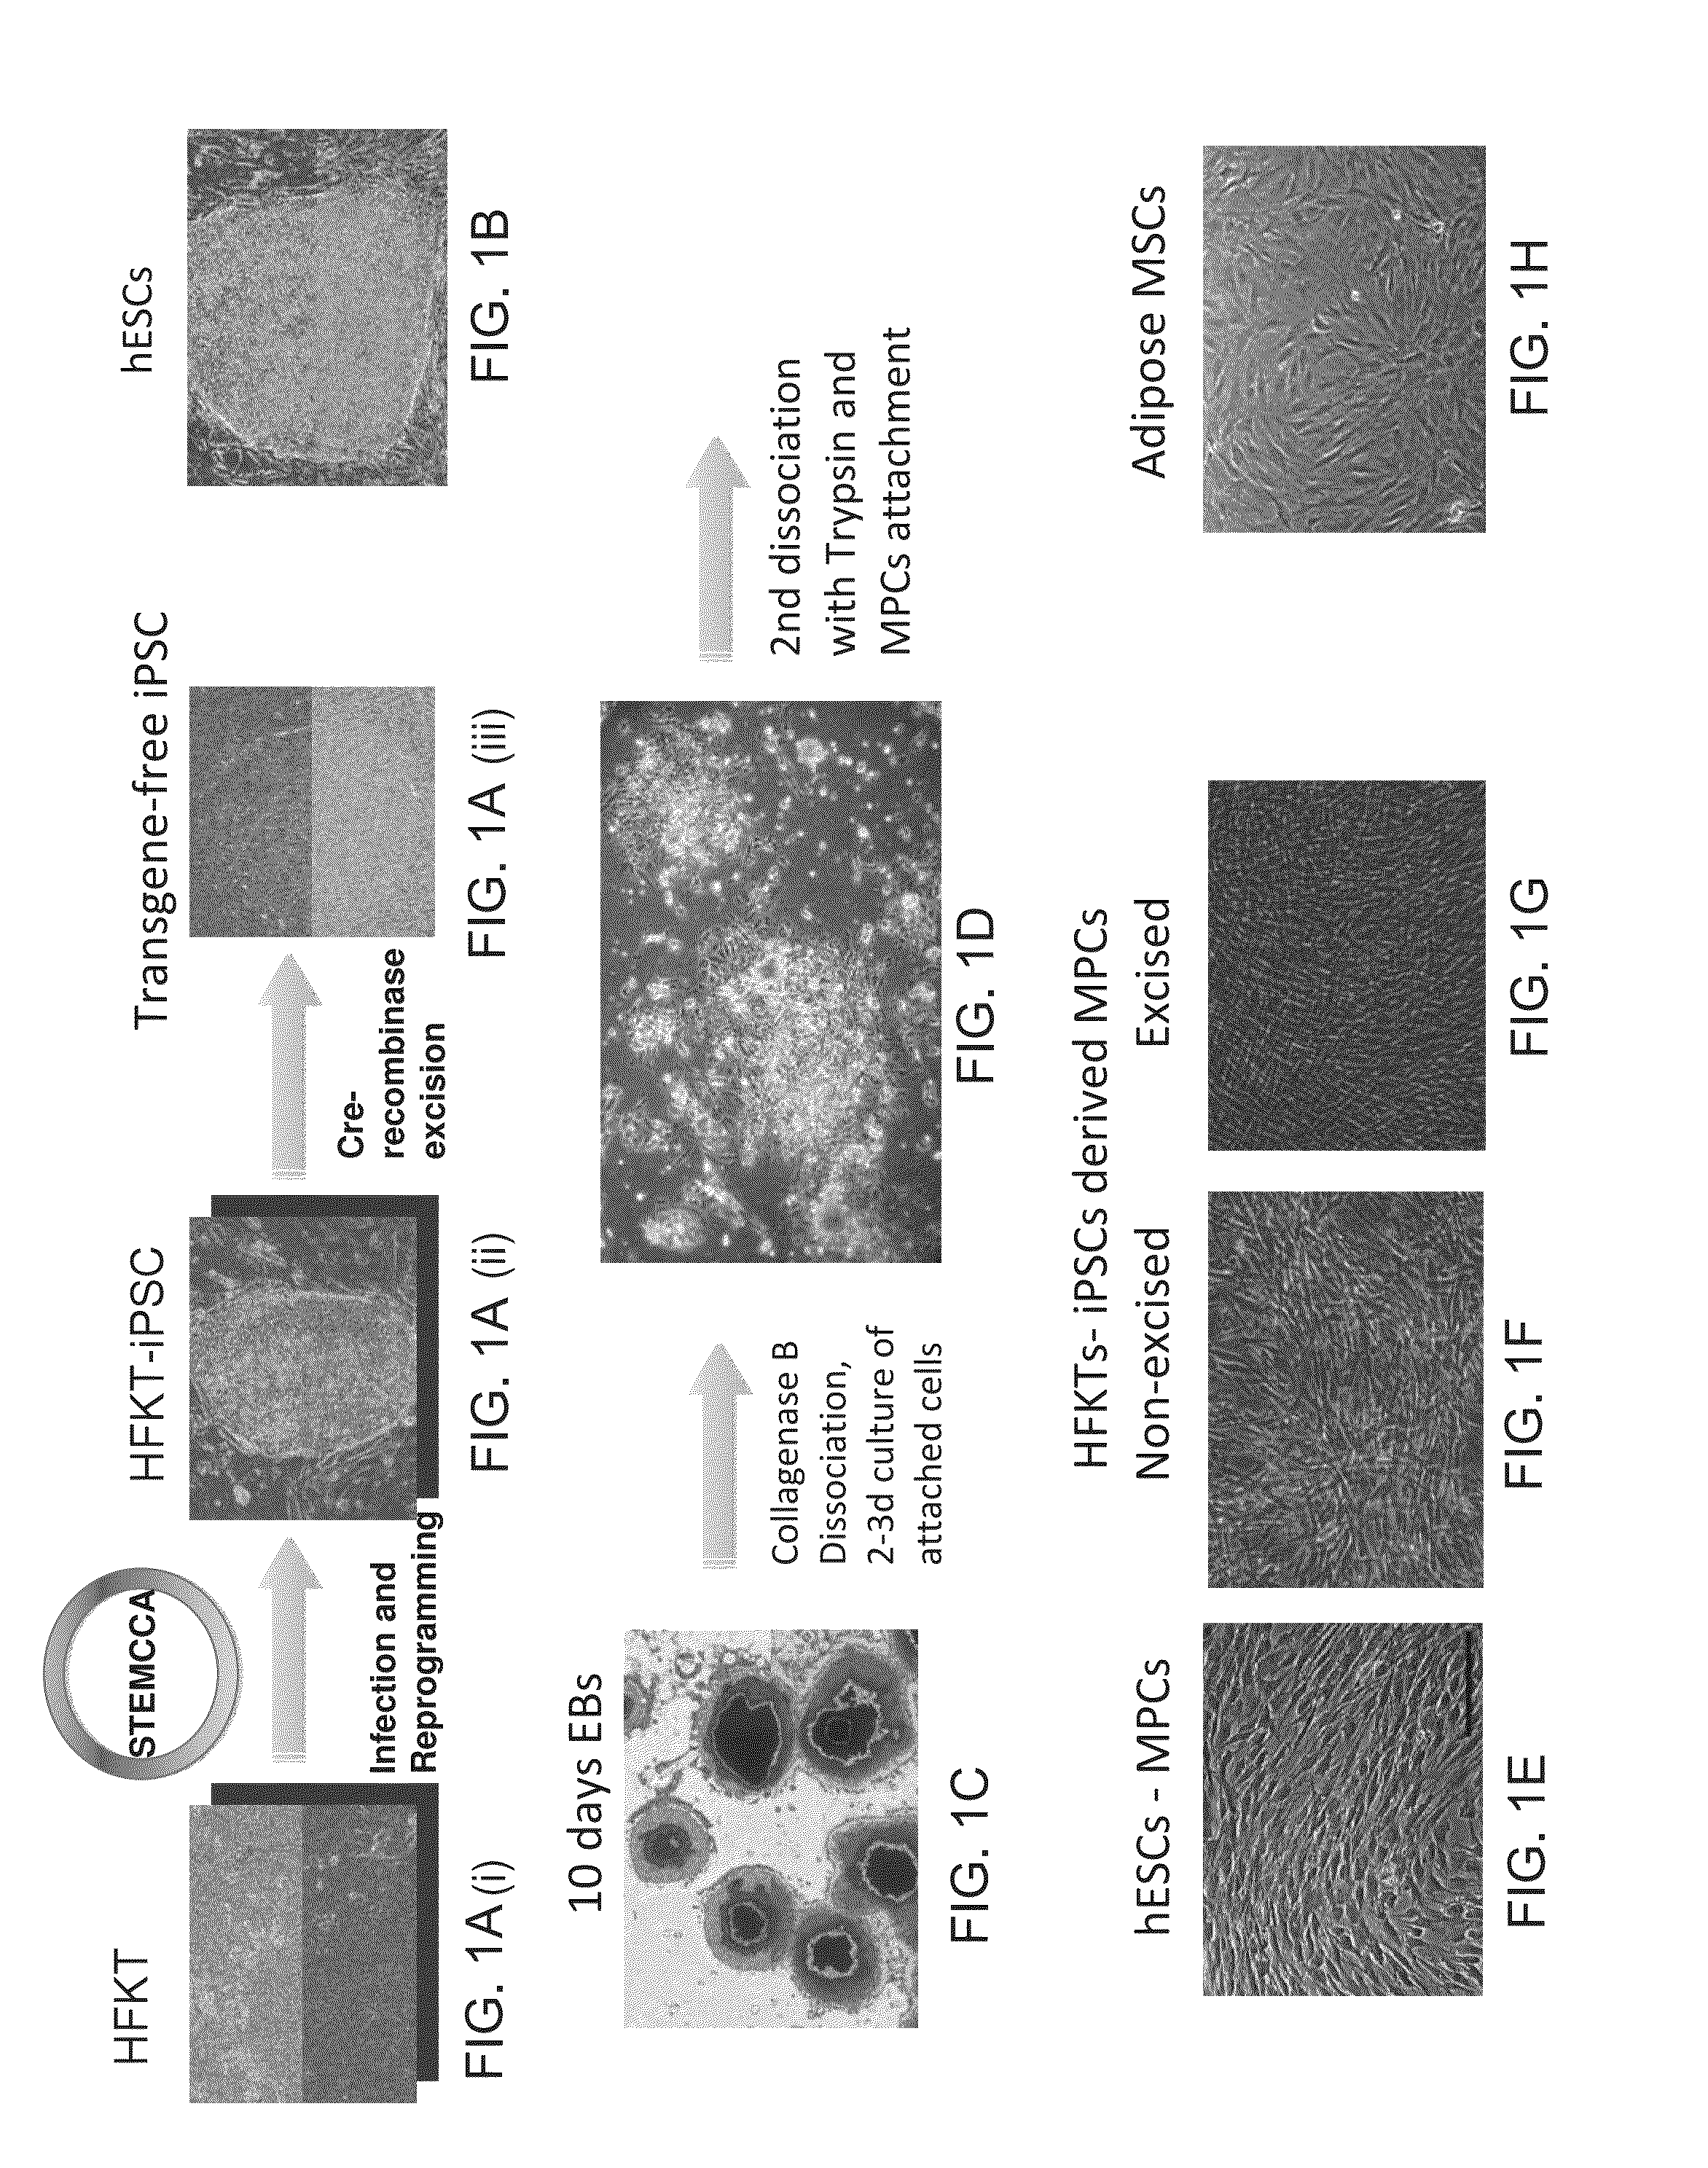 Isolated mesenchymal progenitor cells and extracellular matrix produced thereby